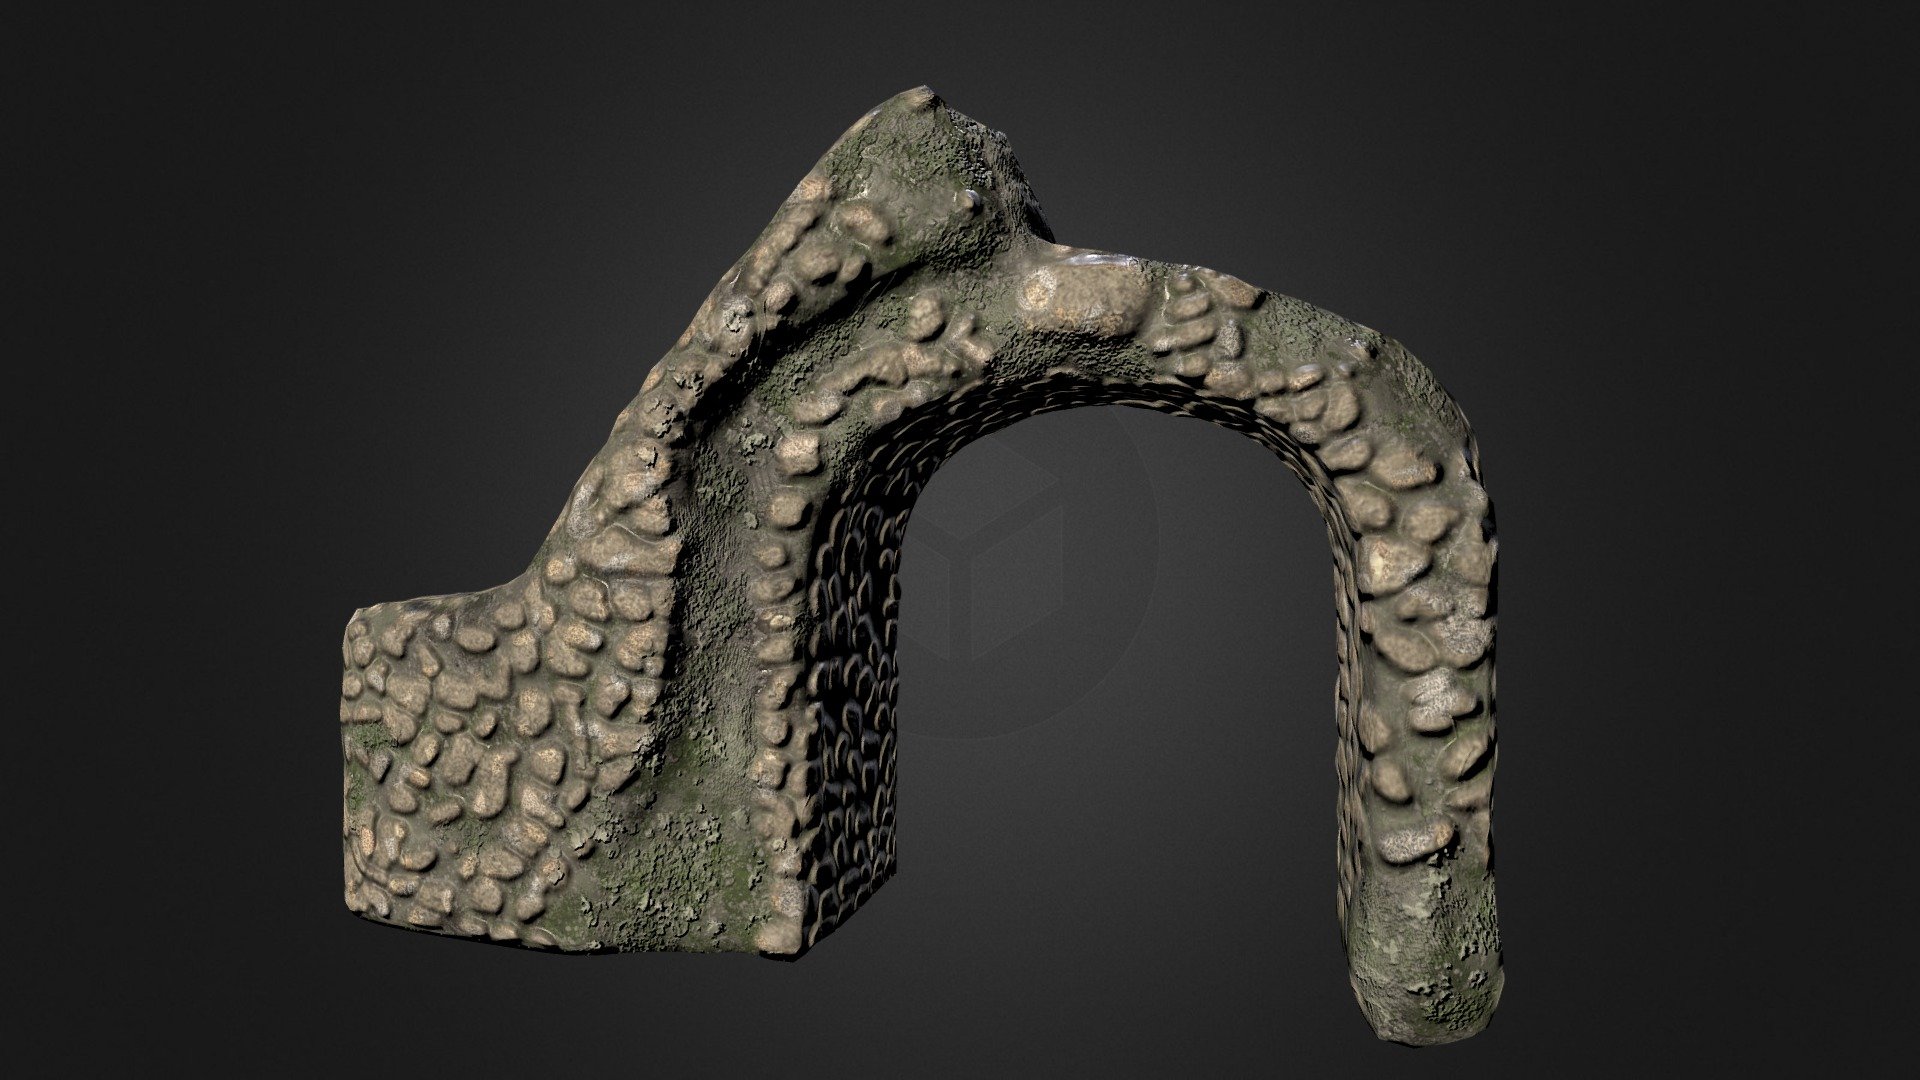 Just messing around with speed sculpting rocks by hand in mudbox 3d model